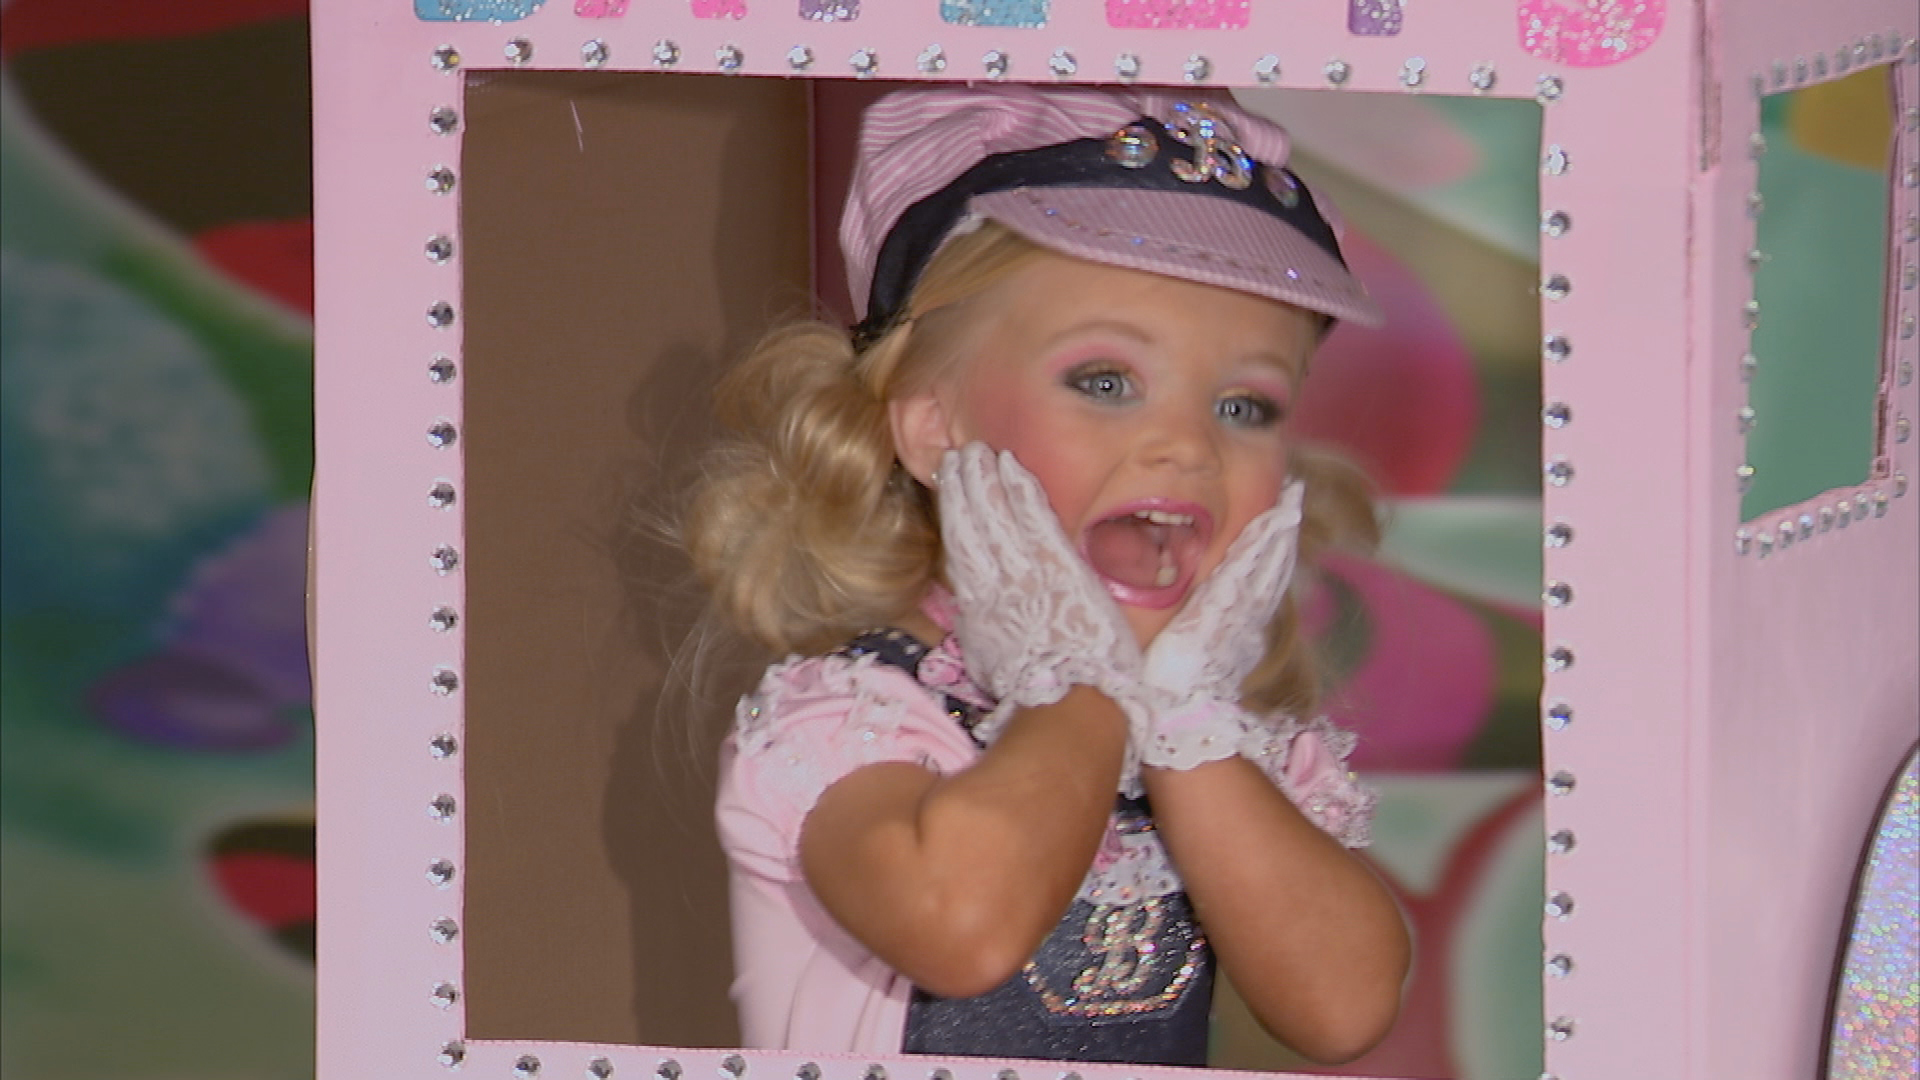 Toddlers & Tiaras prostitute costume controversy doesnt 